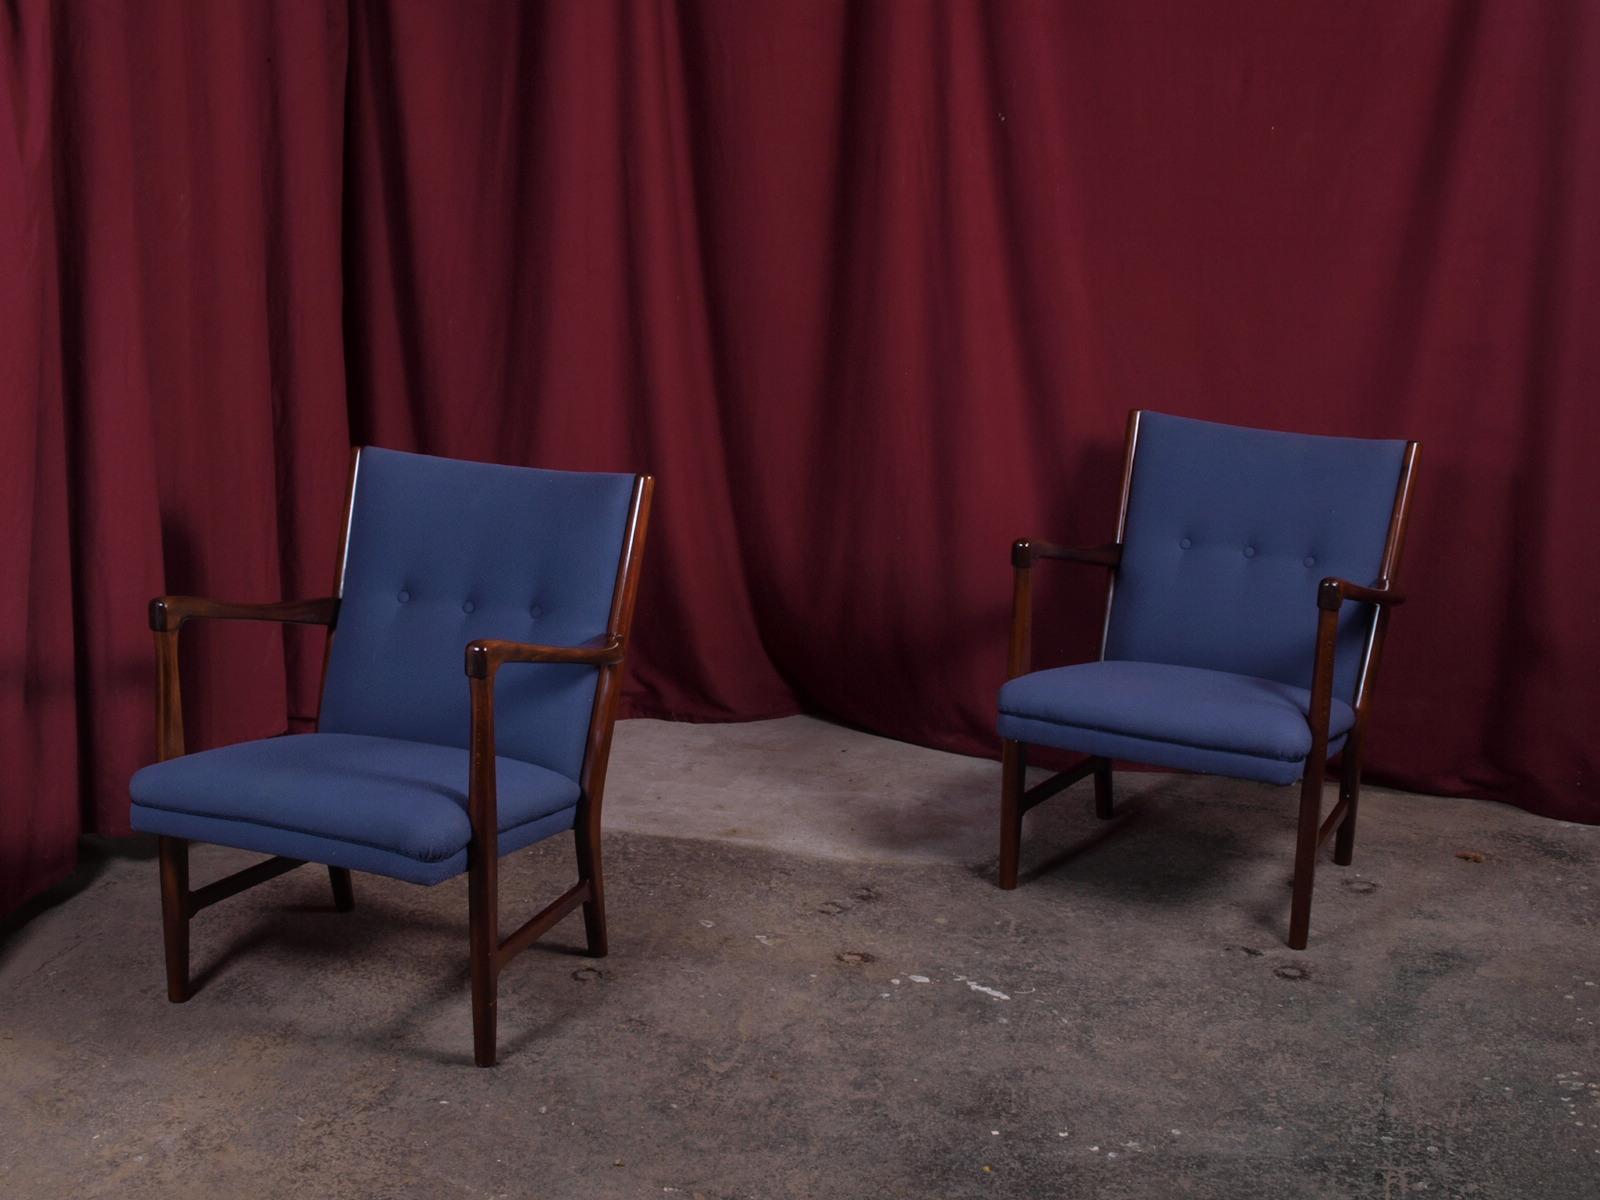 Indulge in the timeless elegance of mid-century design with these two blue armchairs from Fritz Hansen, complete with their original stamp of authenticity. Crafted in the 1950's / 1960s from beautifully dark-stained beech wood, the chairs feature